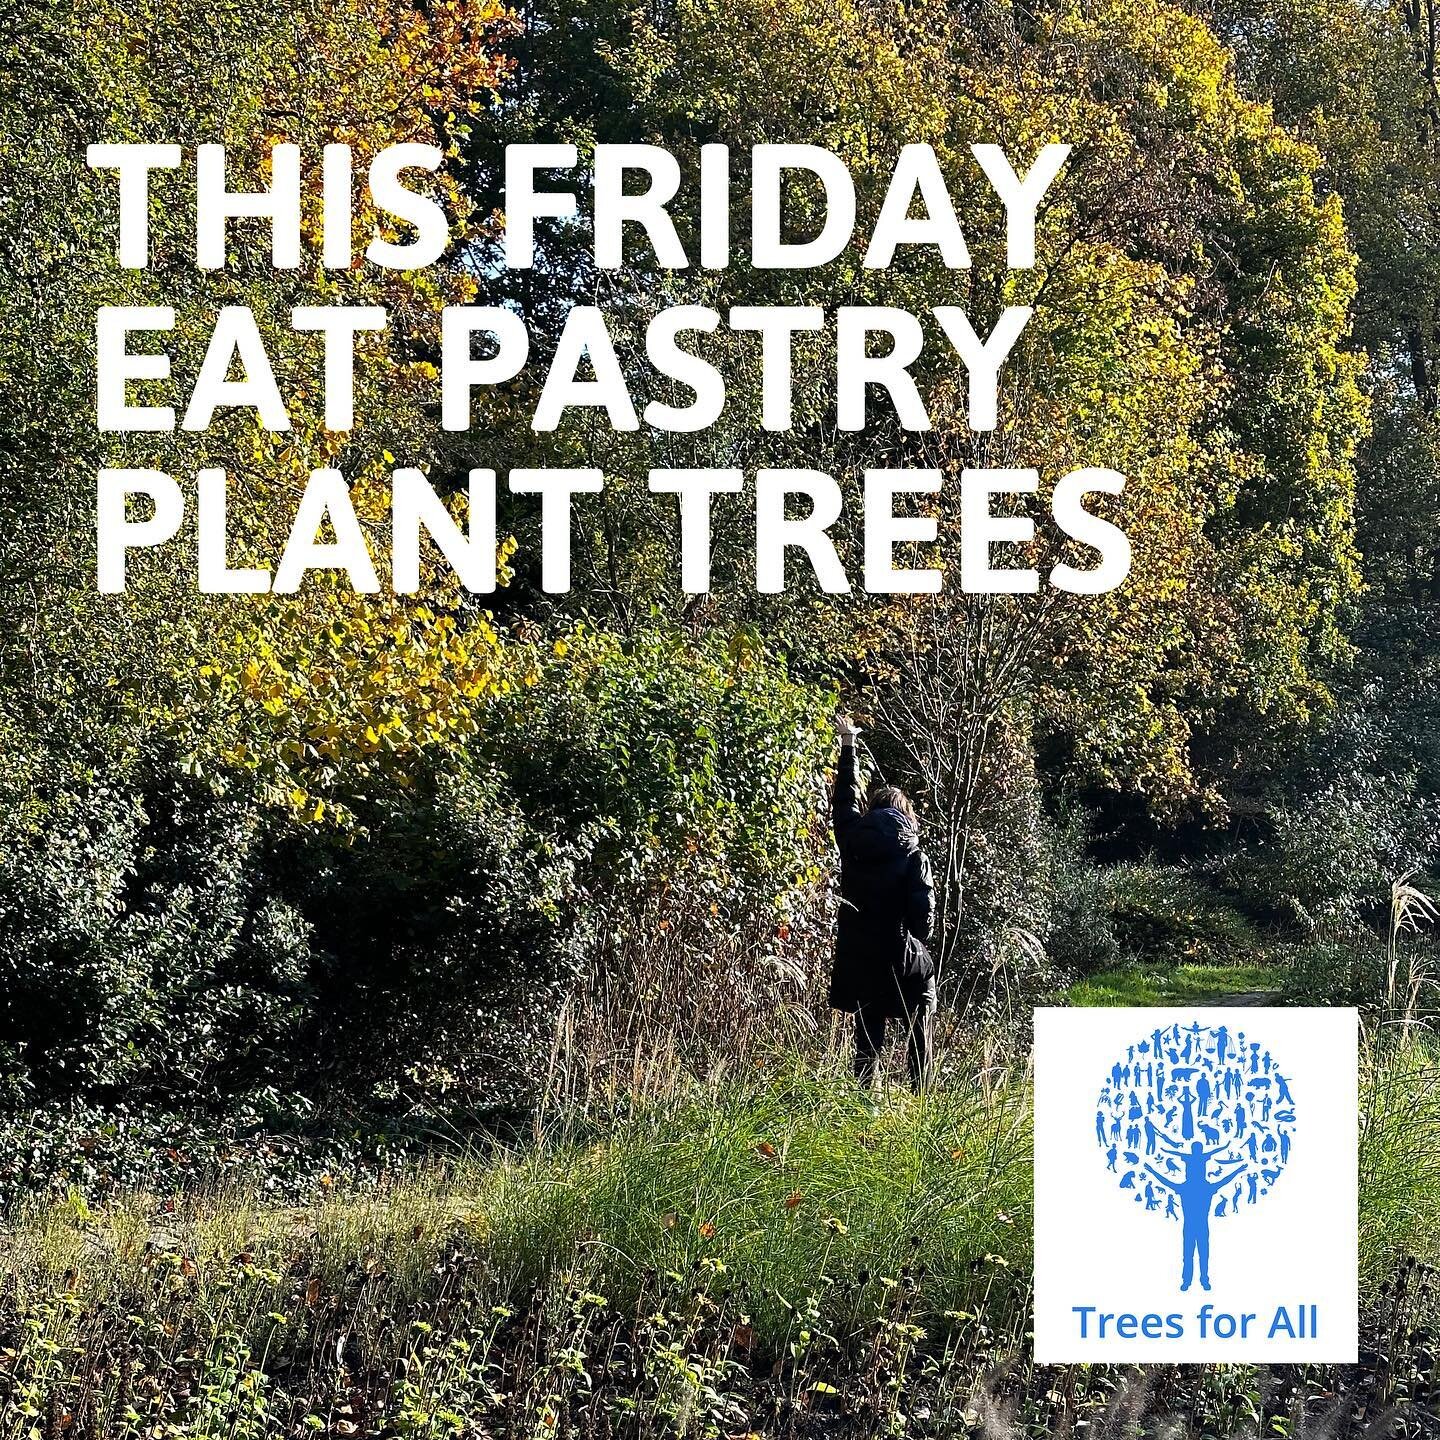 This Black Friday, we&rsquo;d rather celebrate Green Friday together!

All sales of our pastry this Friday the 25th will be donated to the Trees For All foundation as they continue to do great work in making the world a greener place! So come on by t